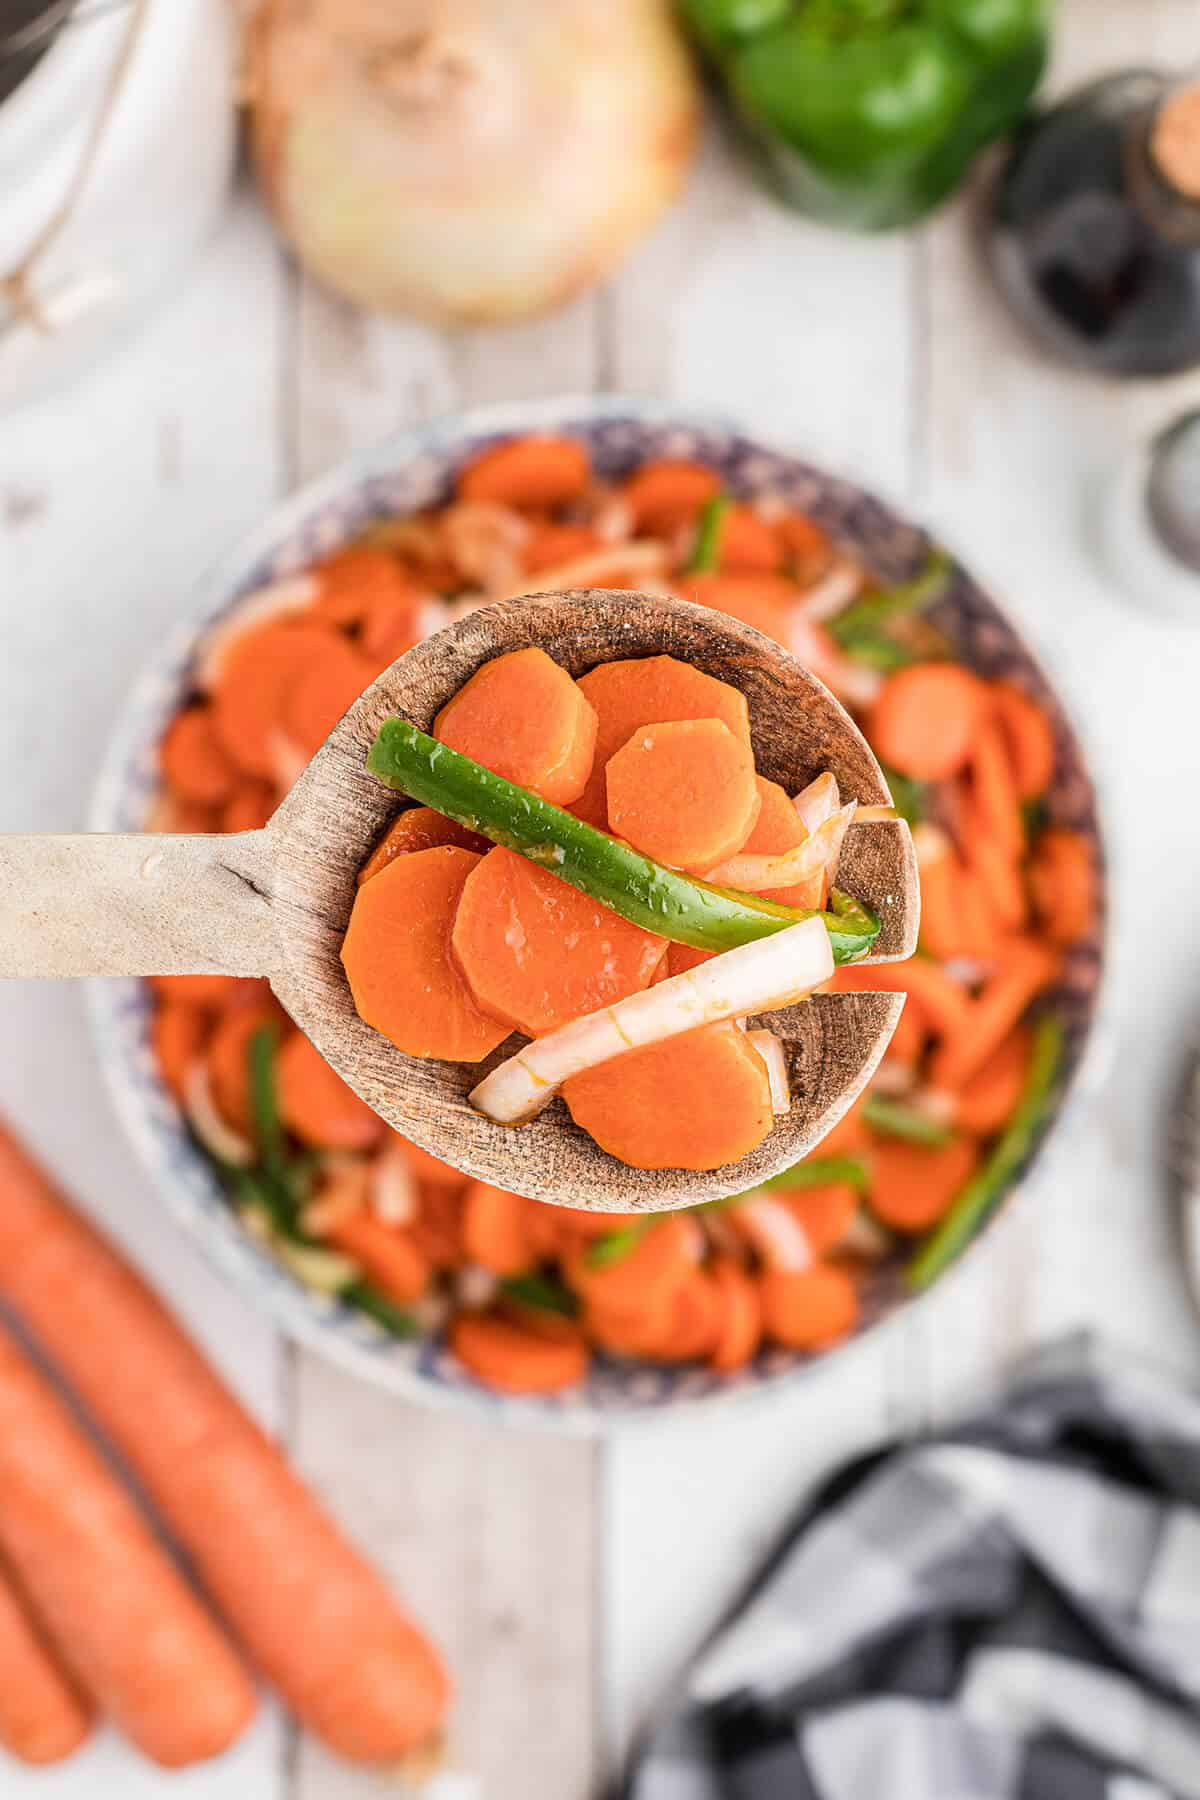 Wooden spoon holding a bite of marinated carrot salad.